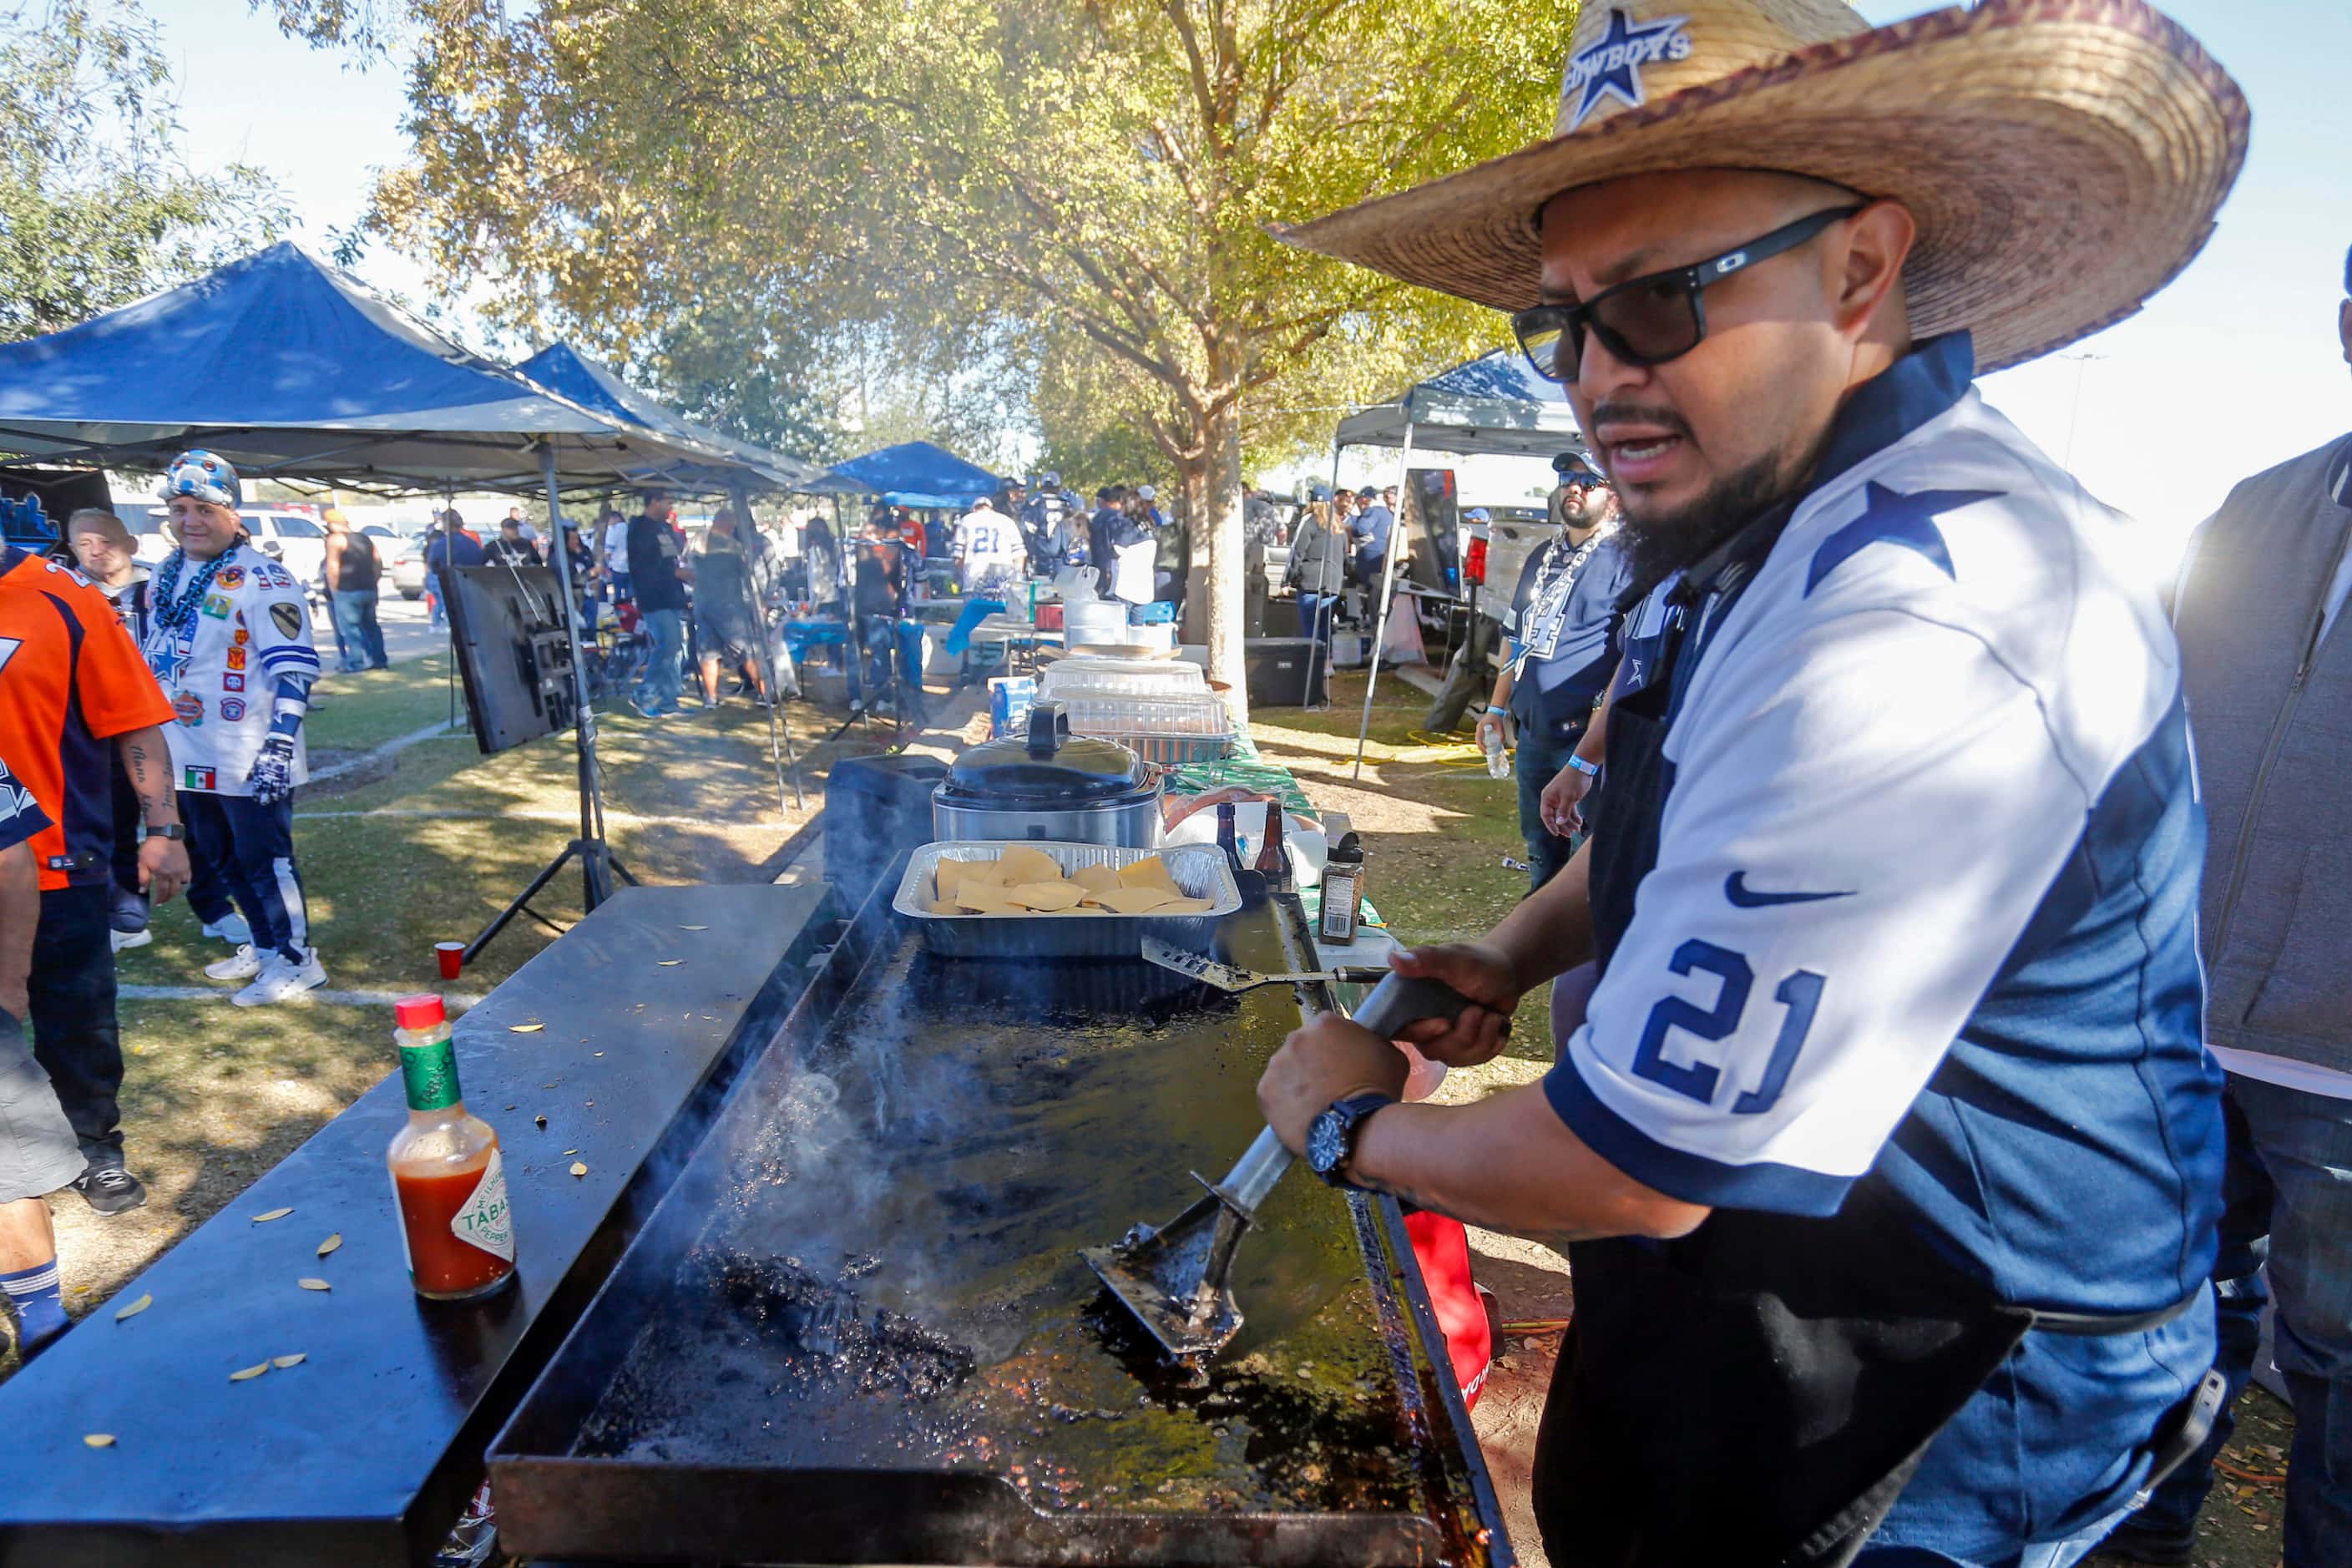 Freddy Saracan, of Dallas, cleans up a grill on the parking lot of AT&T Stadium before a NFL...